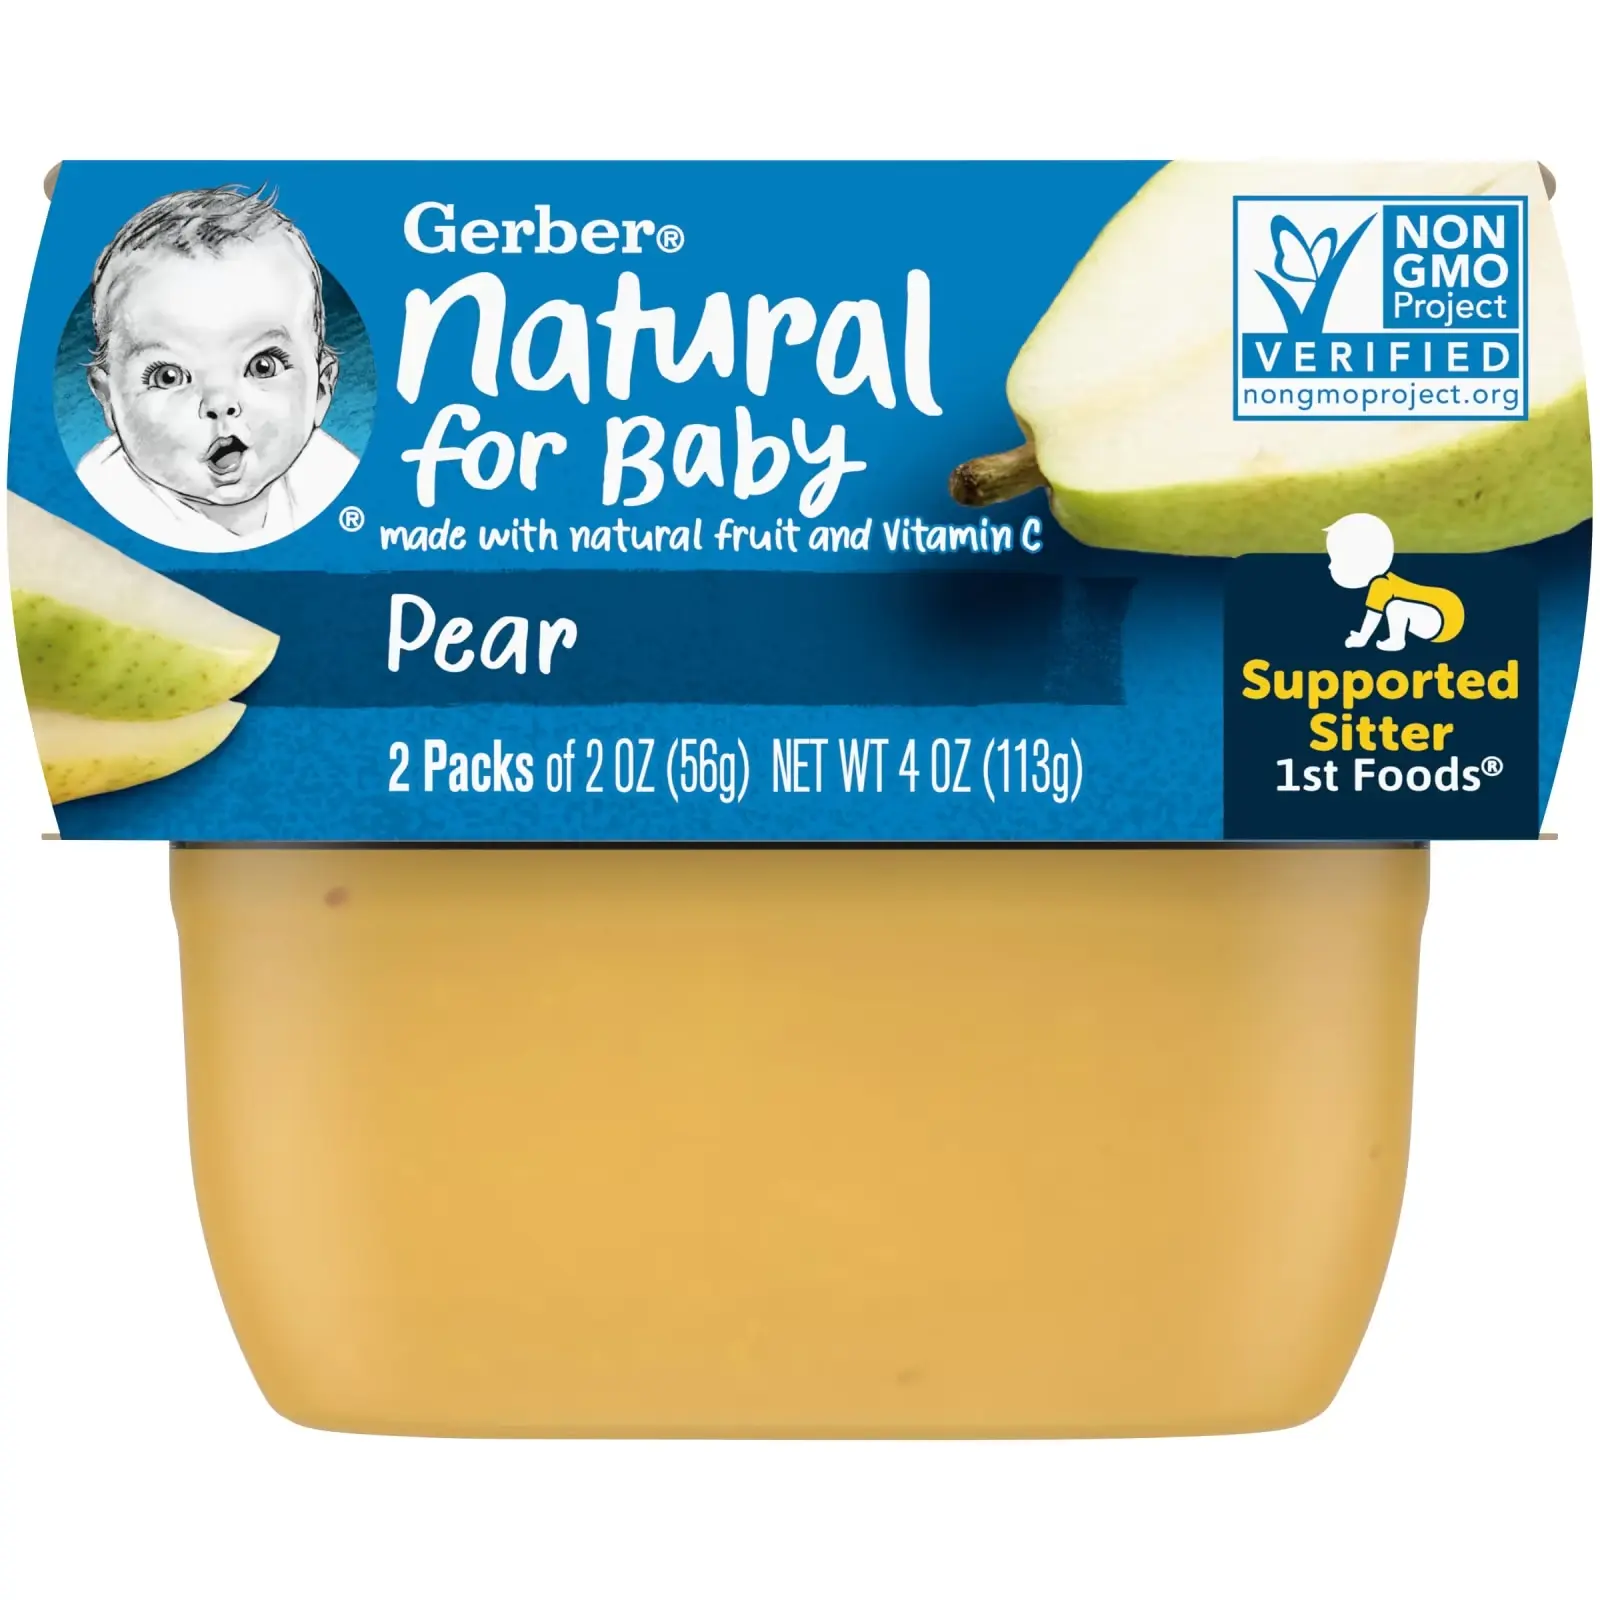 Пюре Gerber Natural for Baby, 1st Foods, Pear, 2 банки по 56 г (GBR-00306)